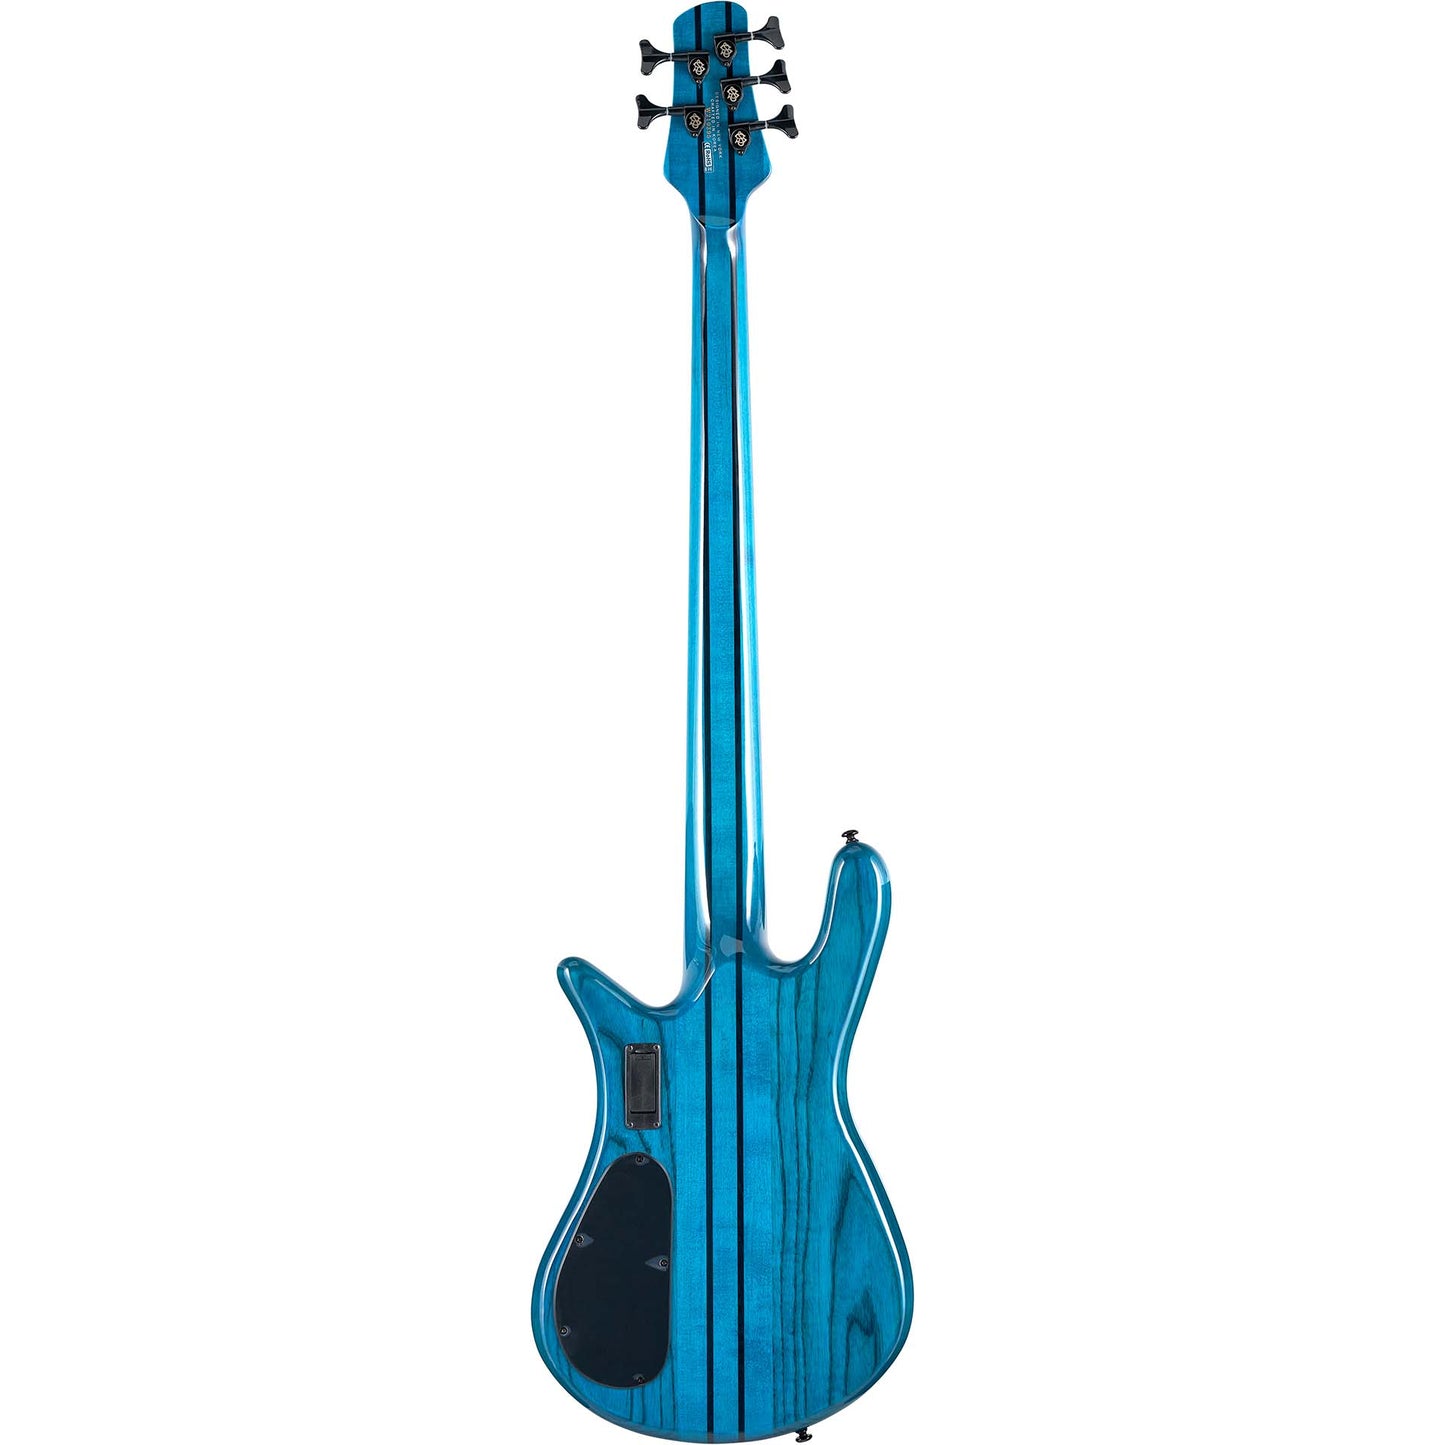 Spector NS Dimension 5 Electric Bass in Black & Blue